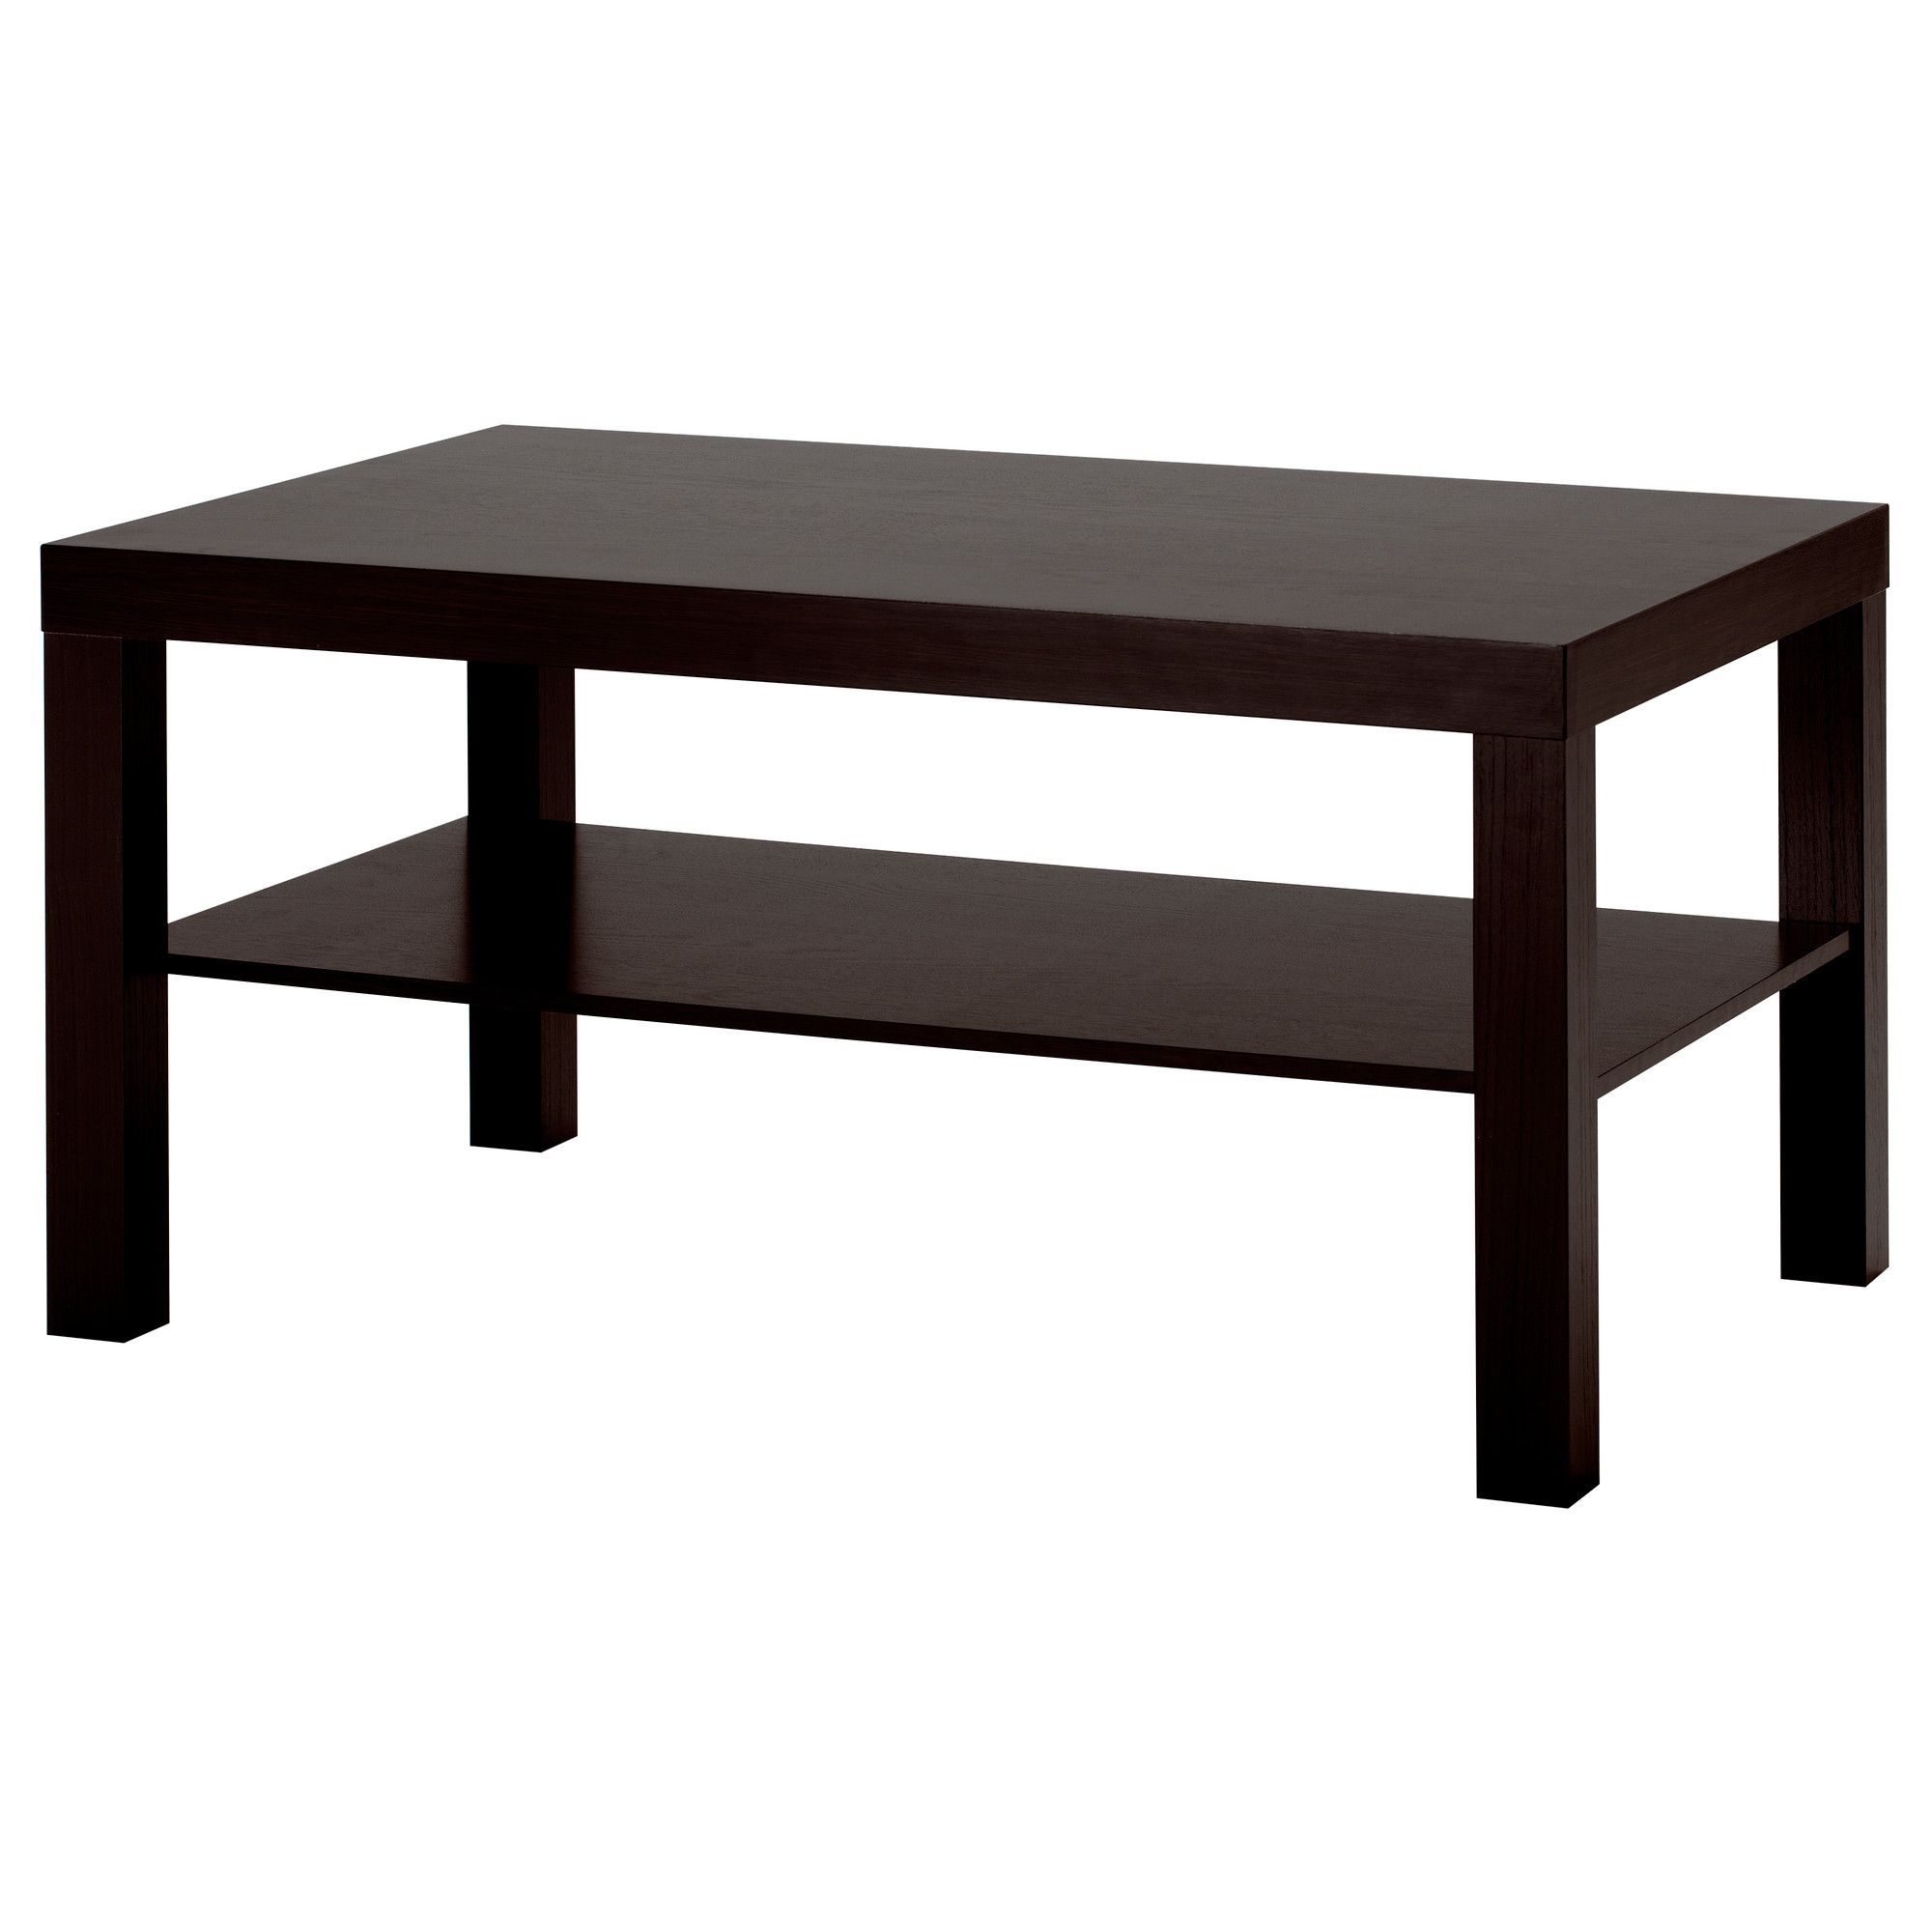 Lack Coffee Table Black Brown 90x55 Cm | Ikea Lietuva Within Medium Coffee Tables (View 3 of 20)